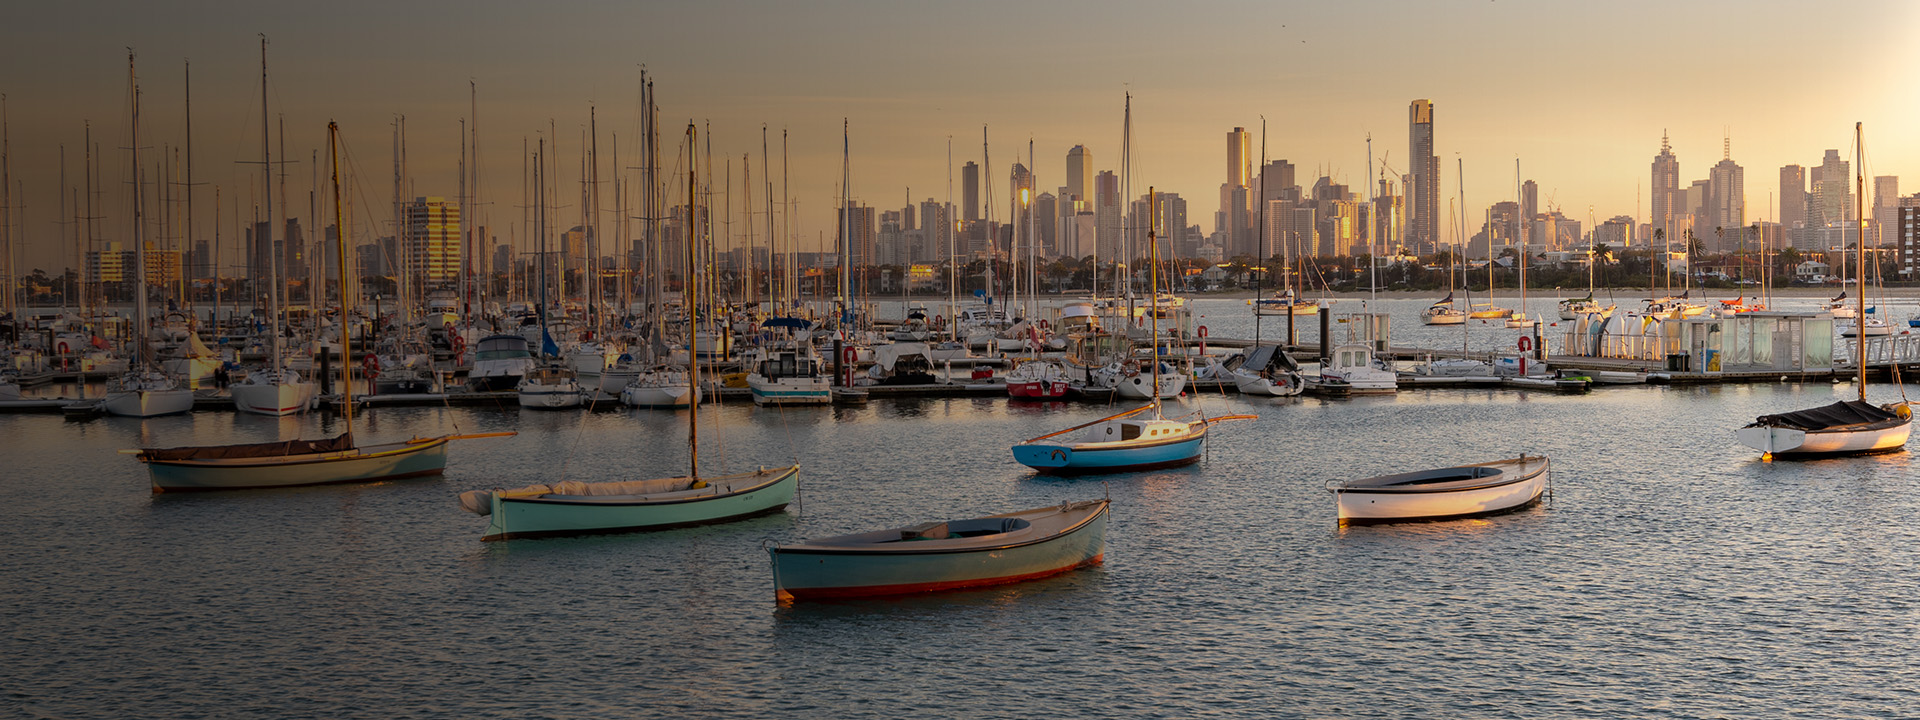 Sunrise over the town of St Kilda and city of Melbourne, Australia